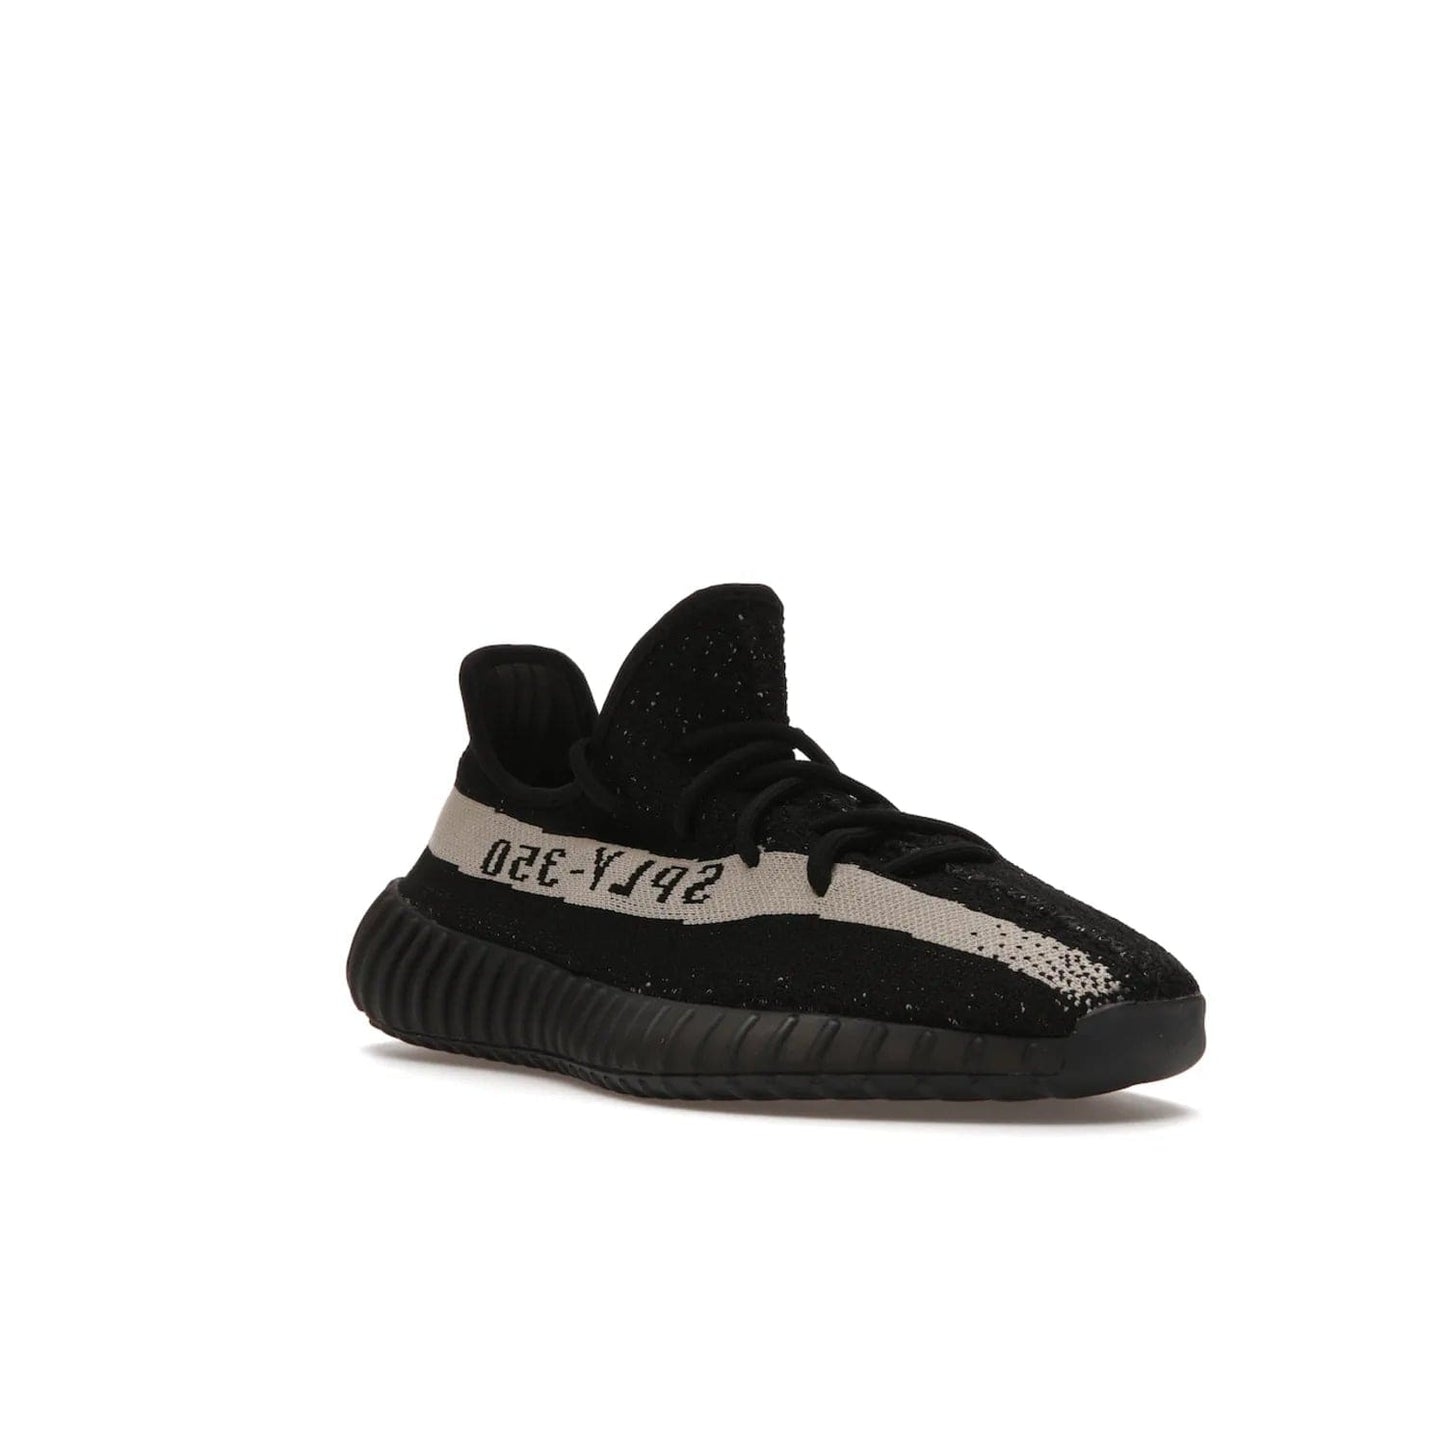 adidas Yeezy Boost 350 V2 Core Black White (2016/2022) - Image 6 - Only at www.BallersClubKickz.com - Stylish adidas Yeezy Boost 350 V2 in classic black with white "SPLY-350" stitched to the side stripe. Features Primeknit upper & Boost sole for comfort. Restock in March 2022.